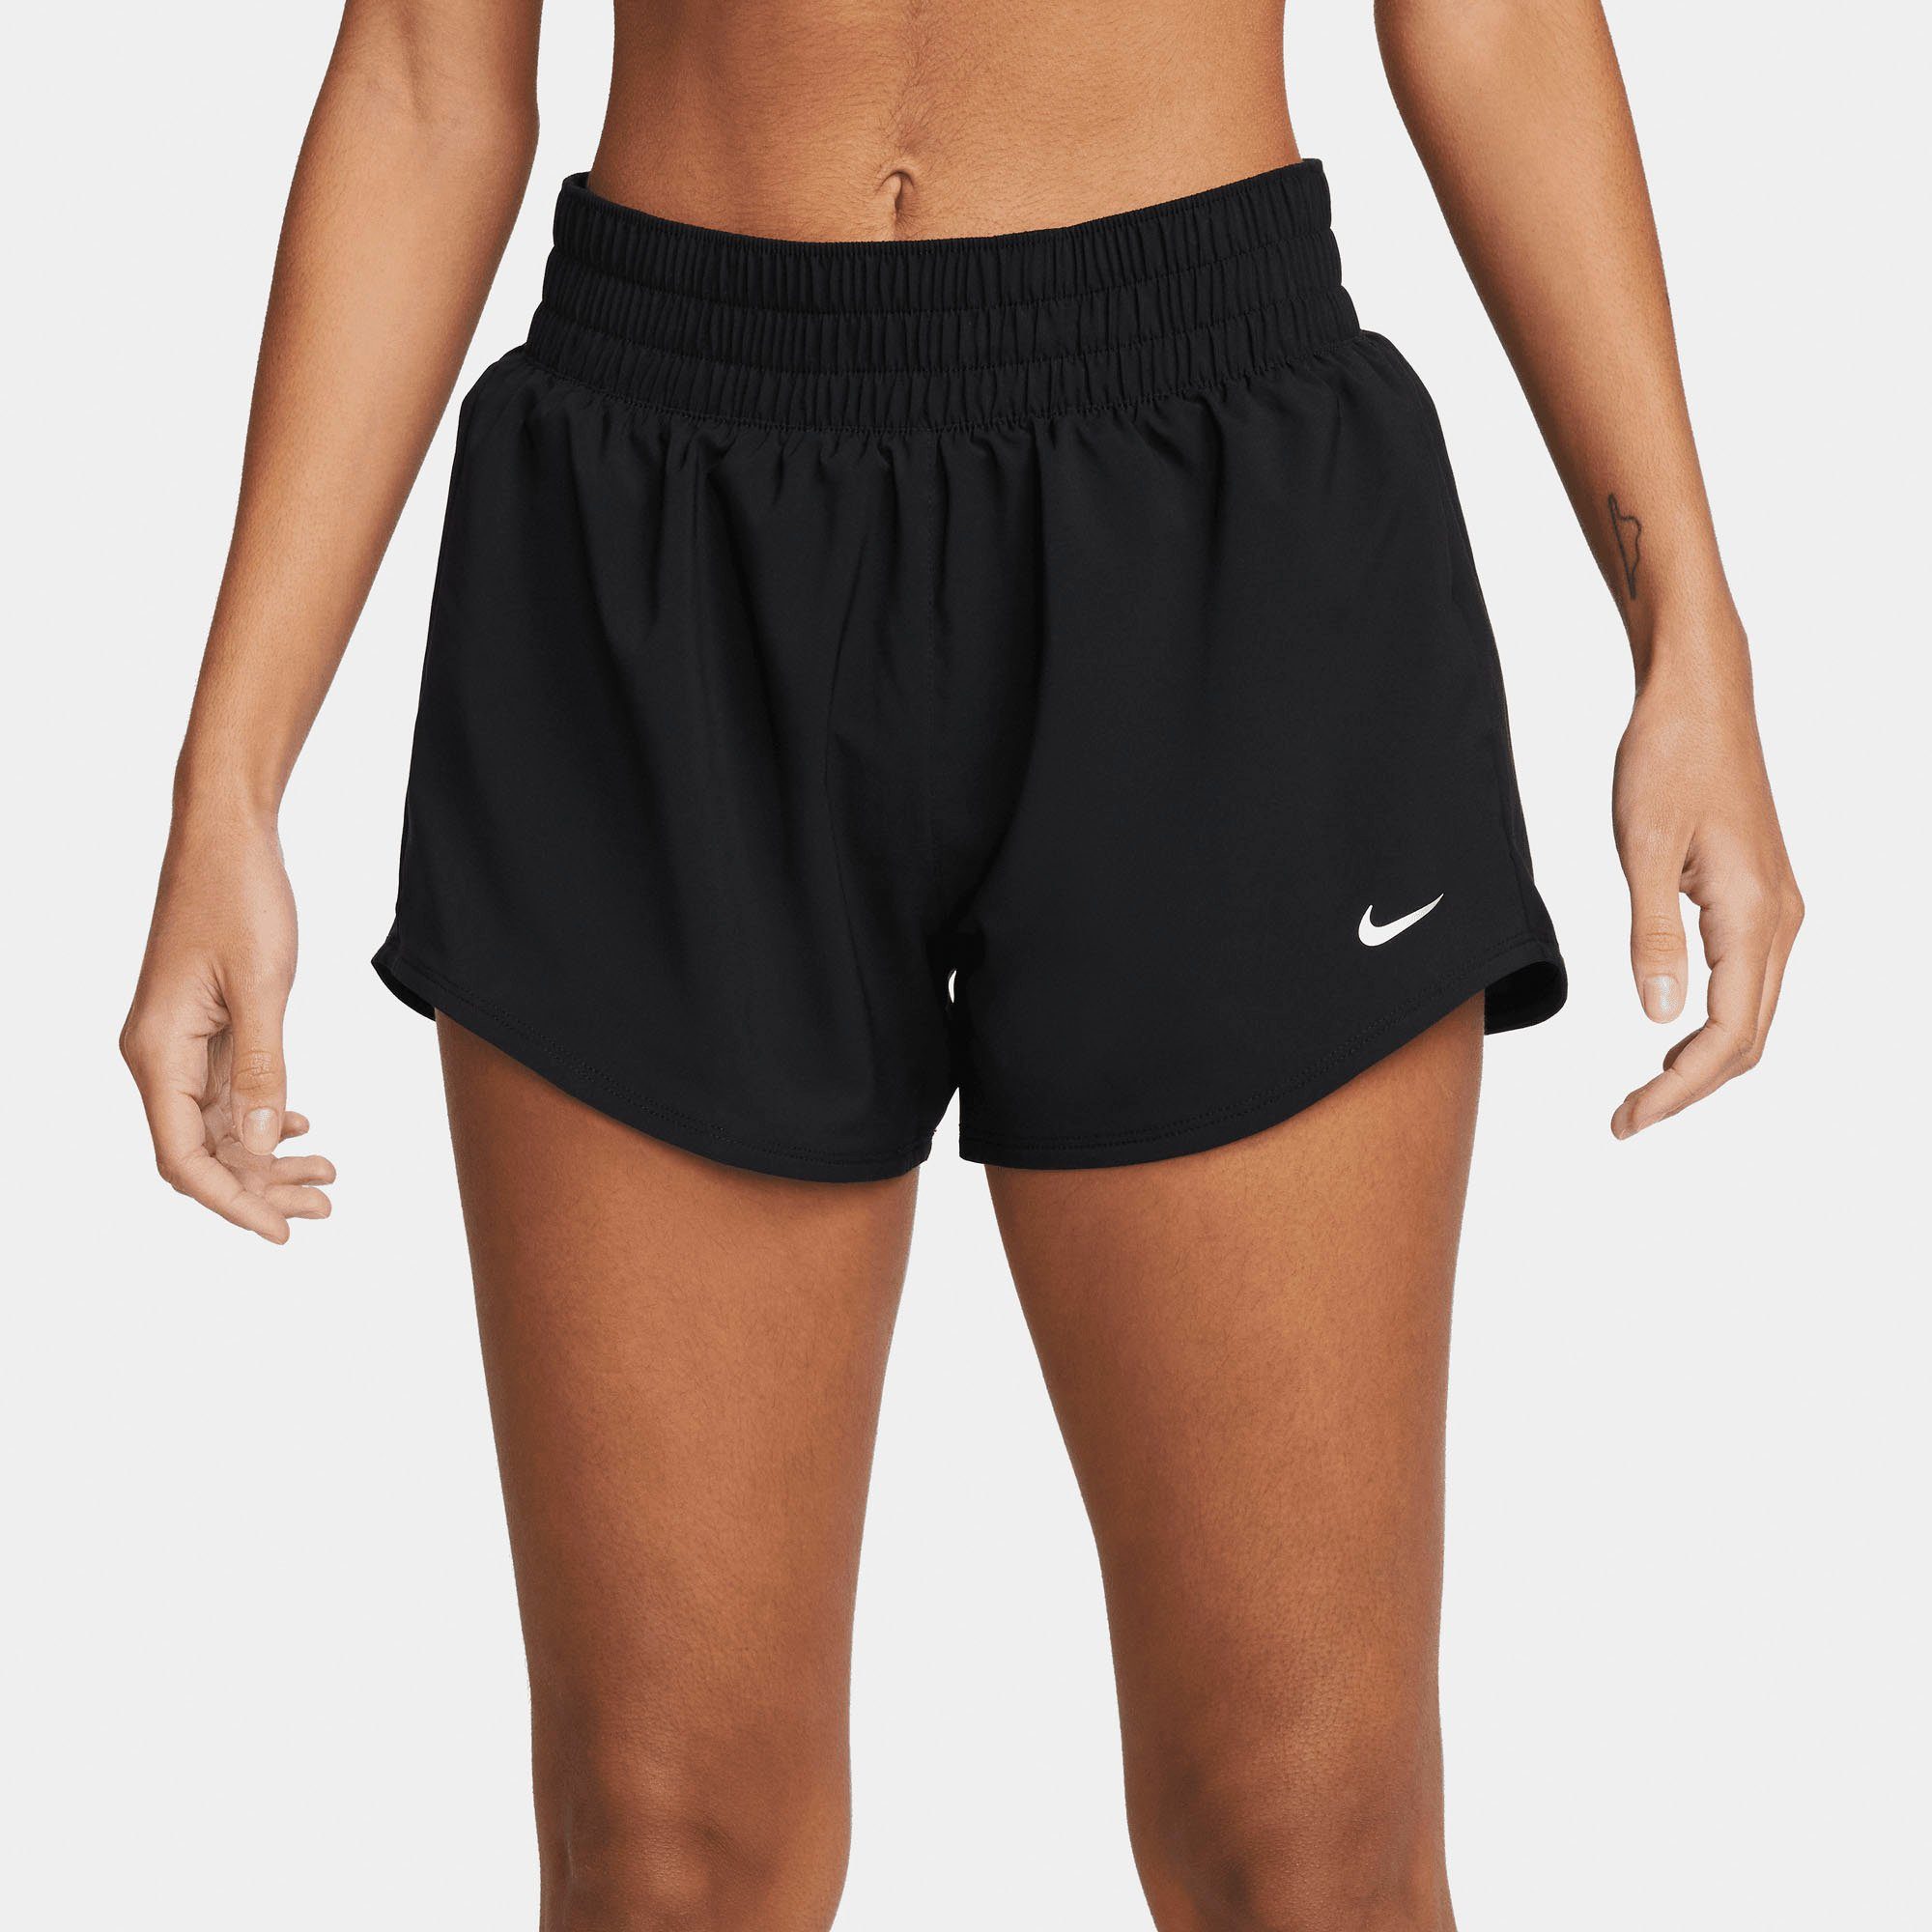 ONE SILV DRI-FIT Nike WOMEN'S BRIEF-LINED Trainingsshorts MID-RISE SHORTS BLACK/REFLECTIVE